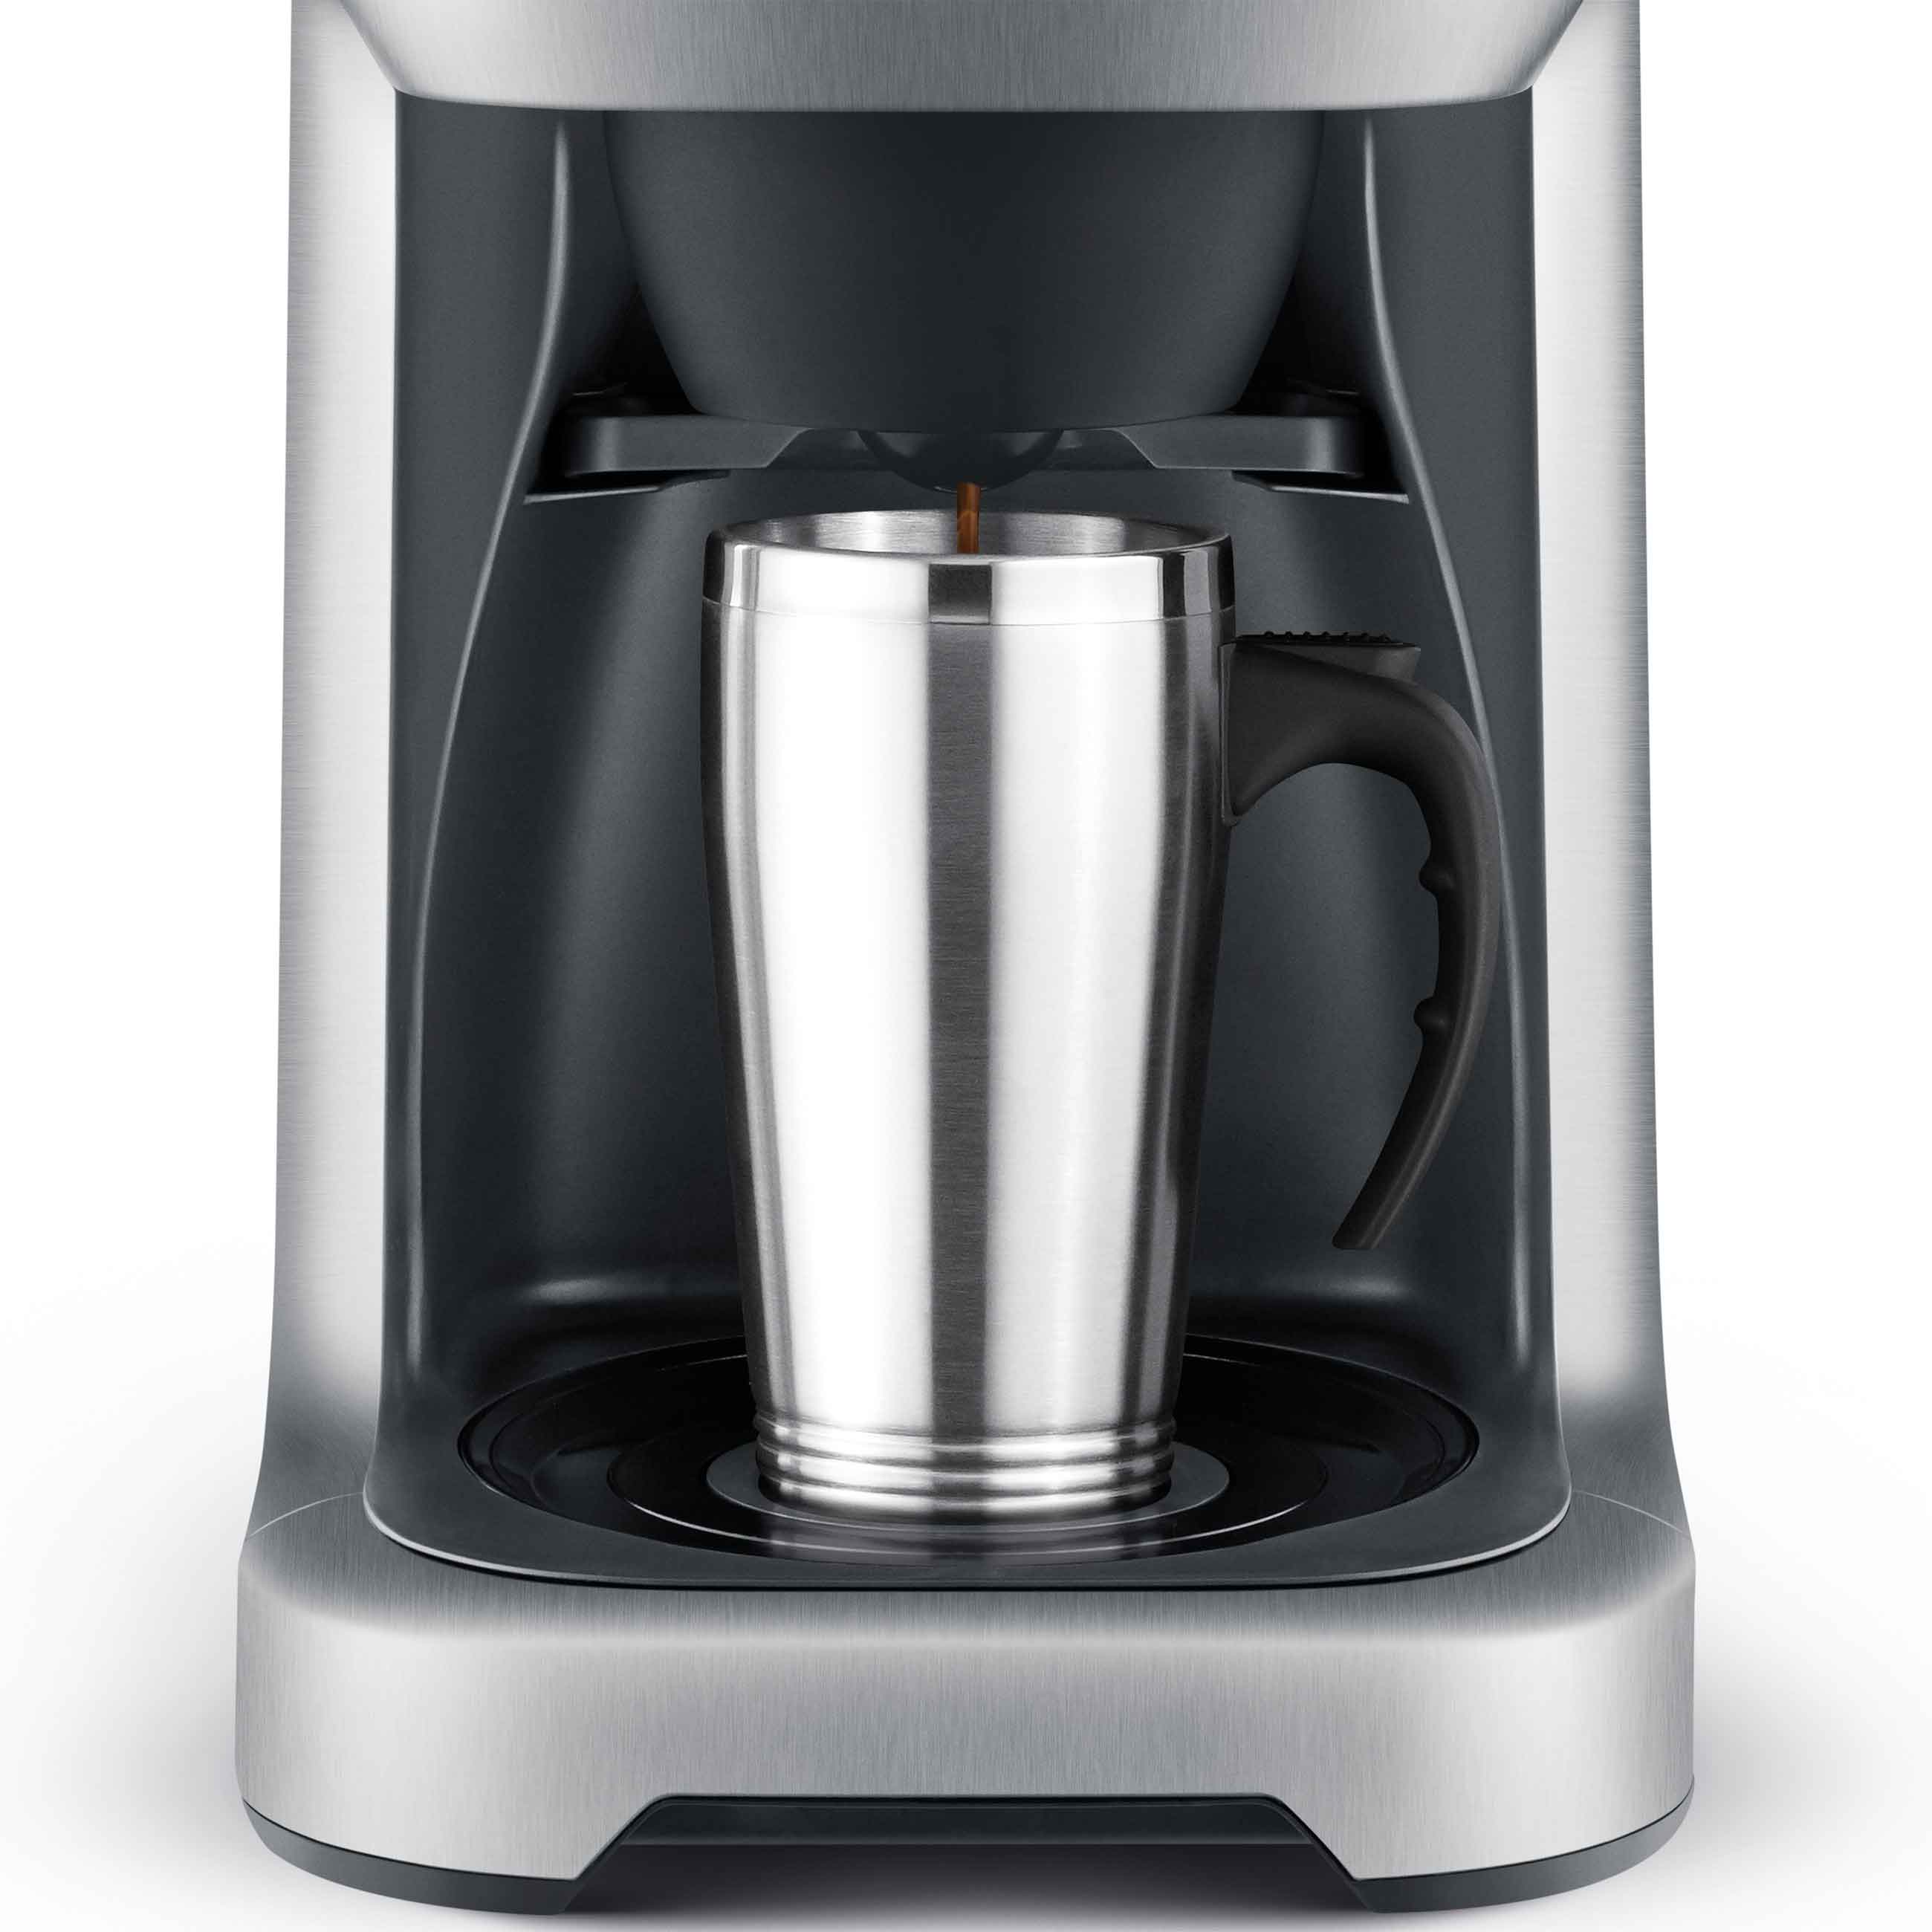 Breville BDC650BSSUSC The Grind Control Coffee Maker 